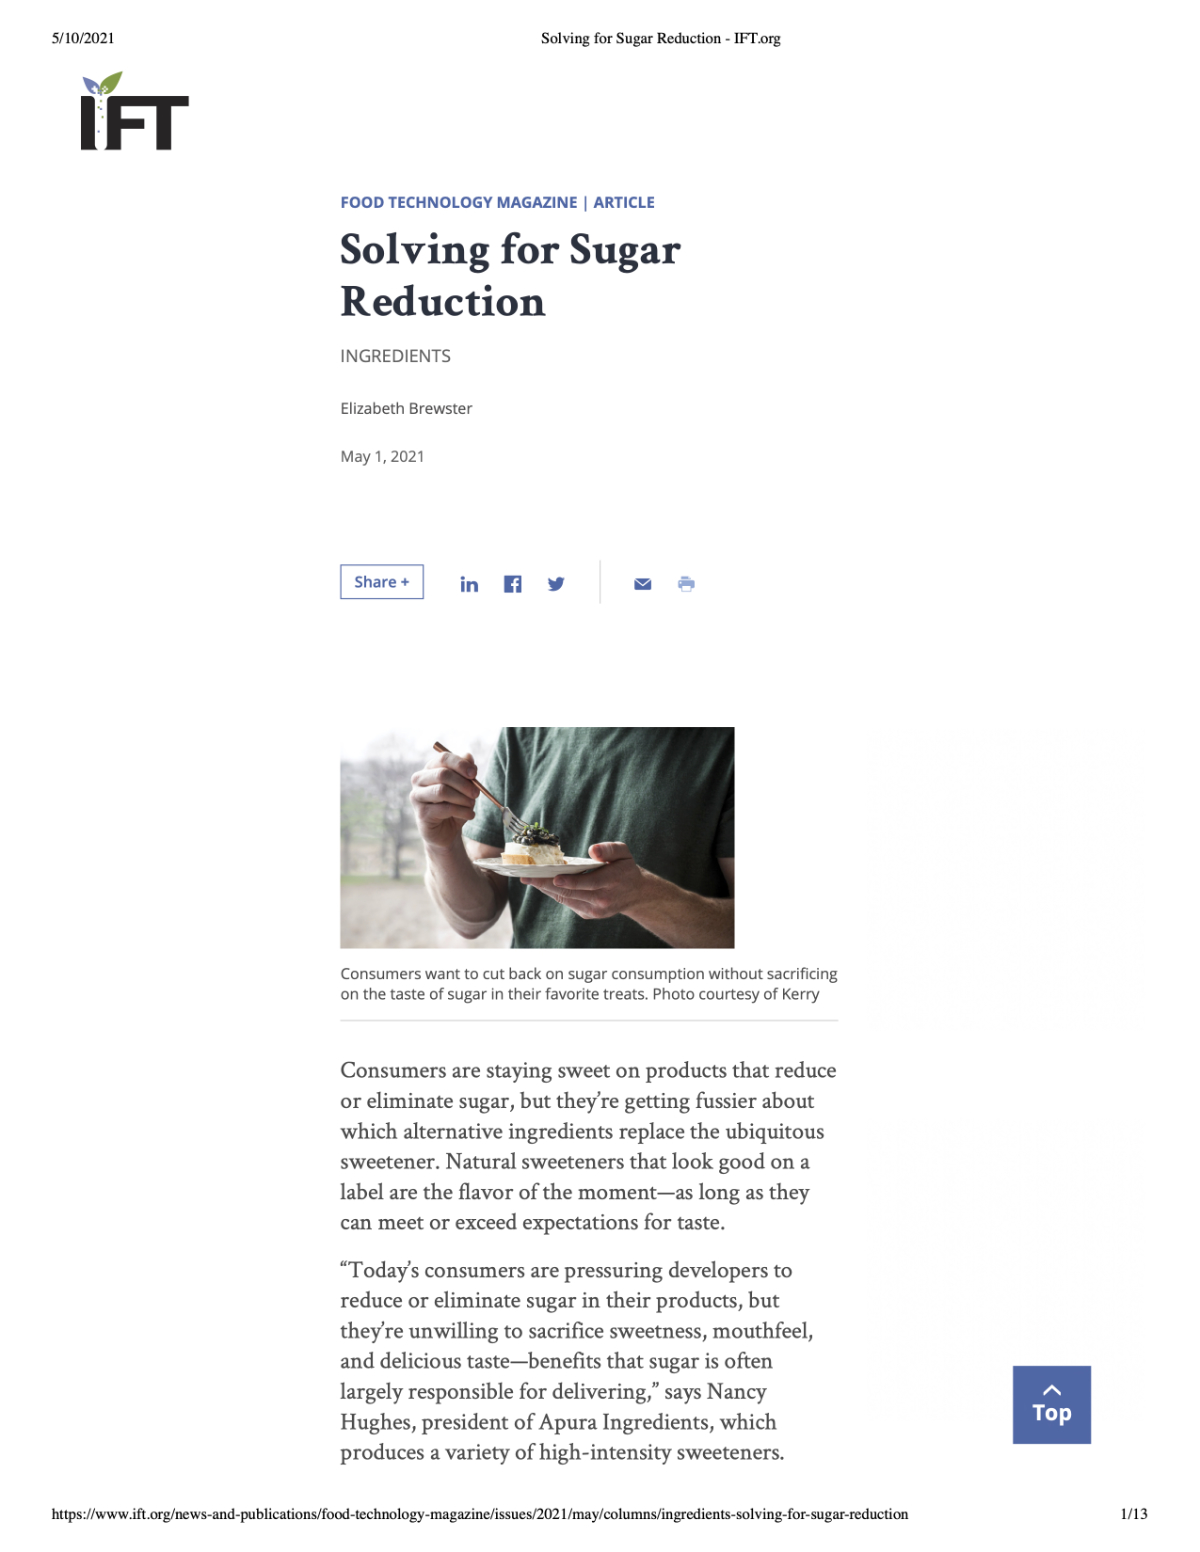 IFT - Solving for Sugar Reduction